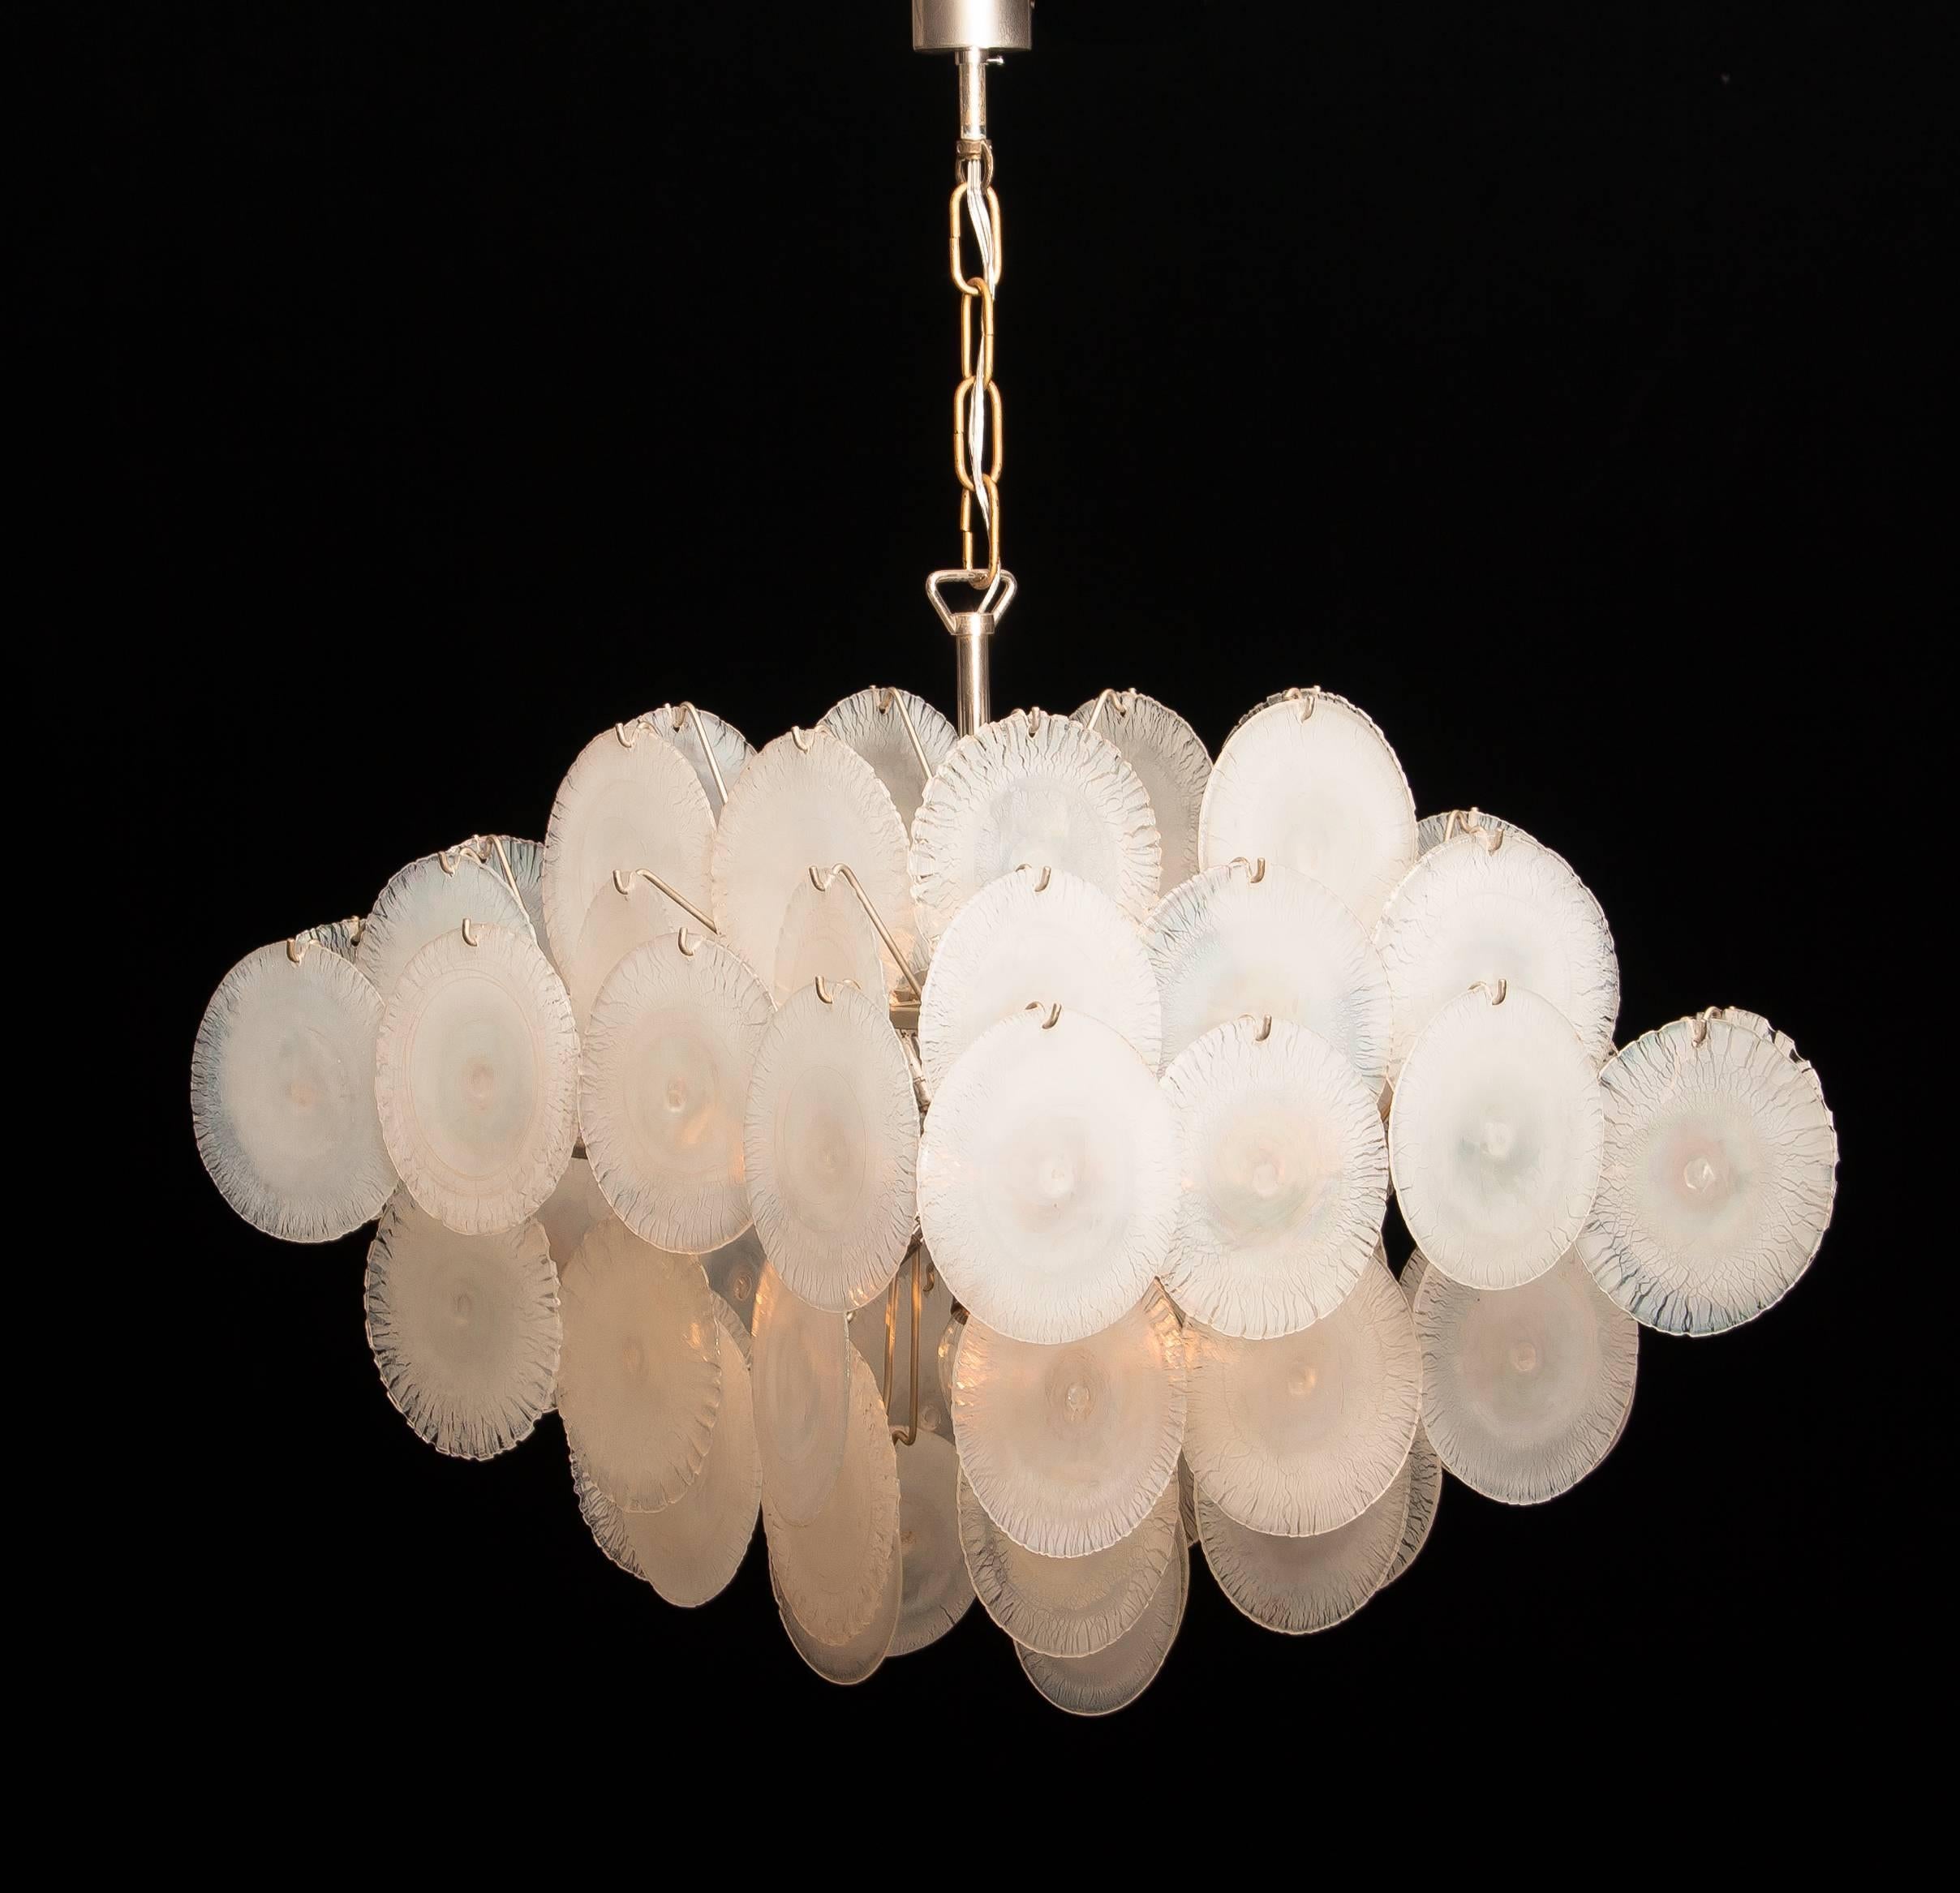 Set of Two Gino Vistosi Chandeliers with White / Pearl Murano Crystal Discs 11